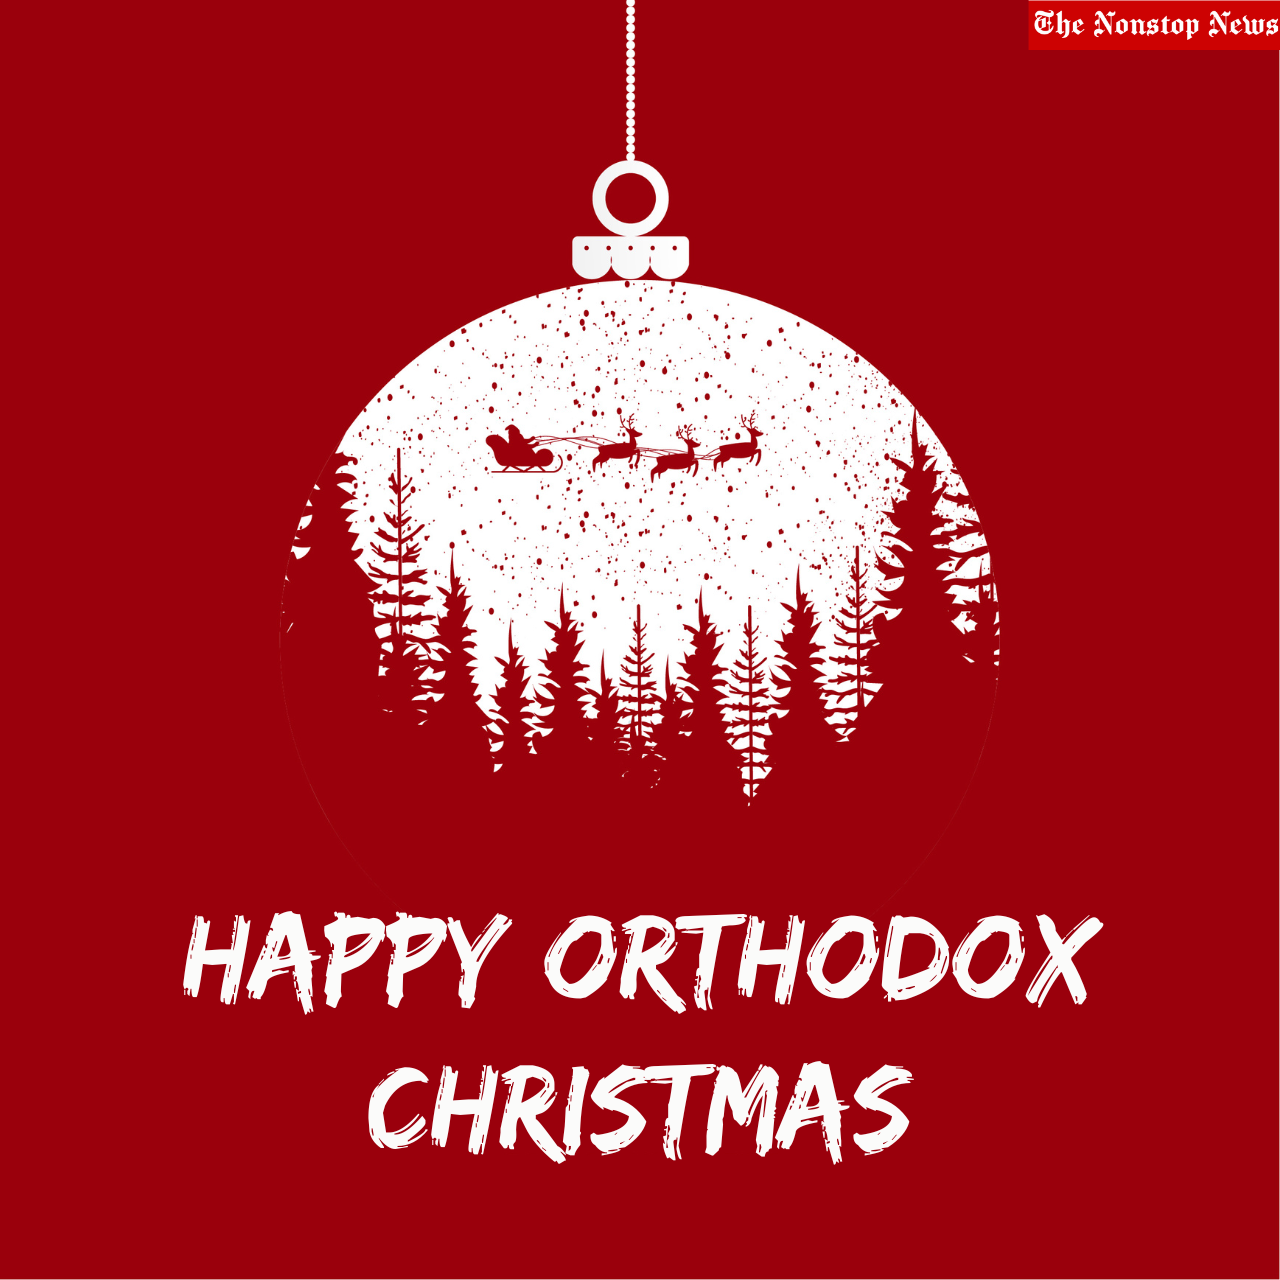 Orthodox Christmas 2023 Quotes, Images, Messages, Greetings, Posters, and Wishes